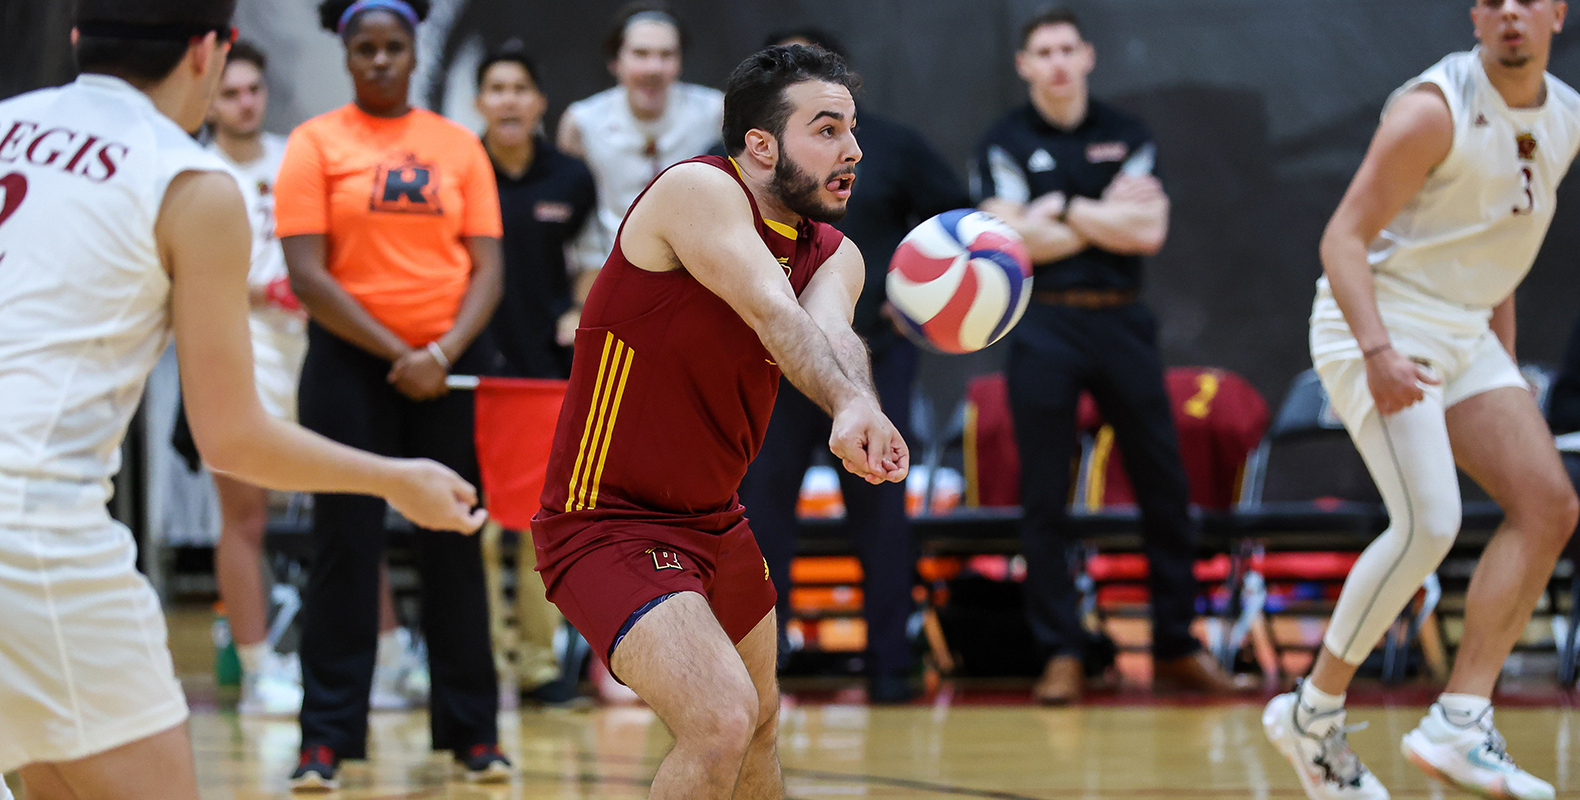 Regis Men’s Volleyball Drops Two During Saturday Tri-Match